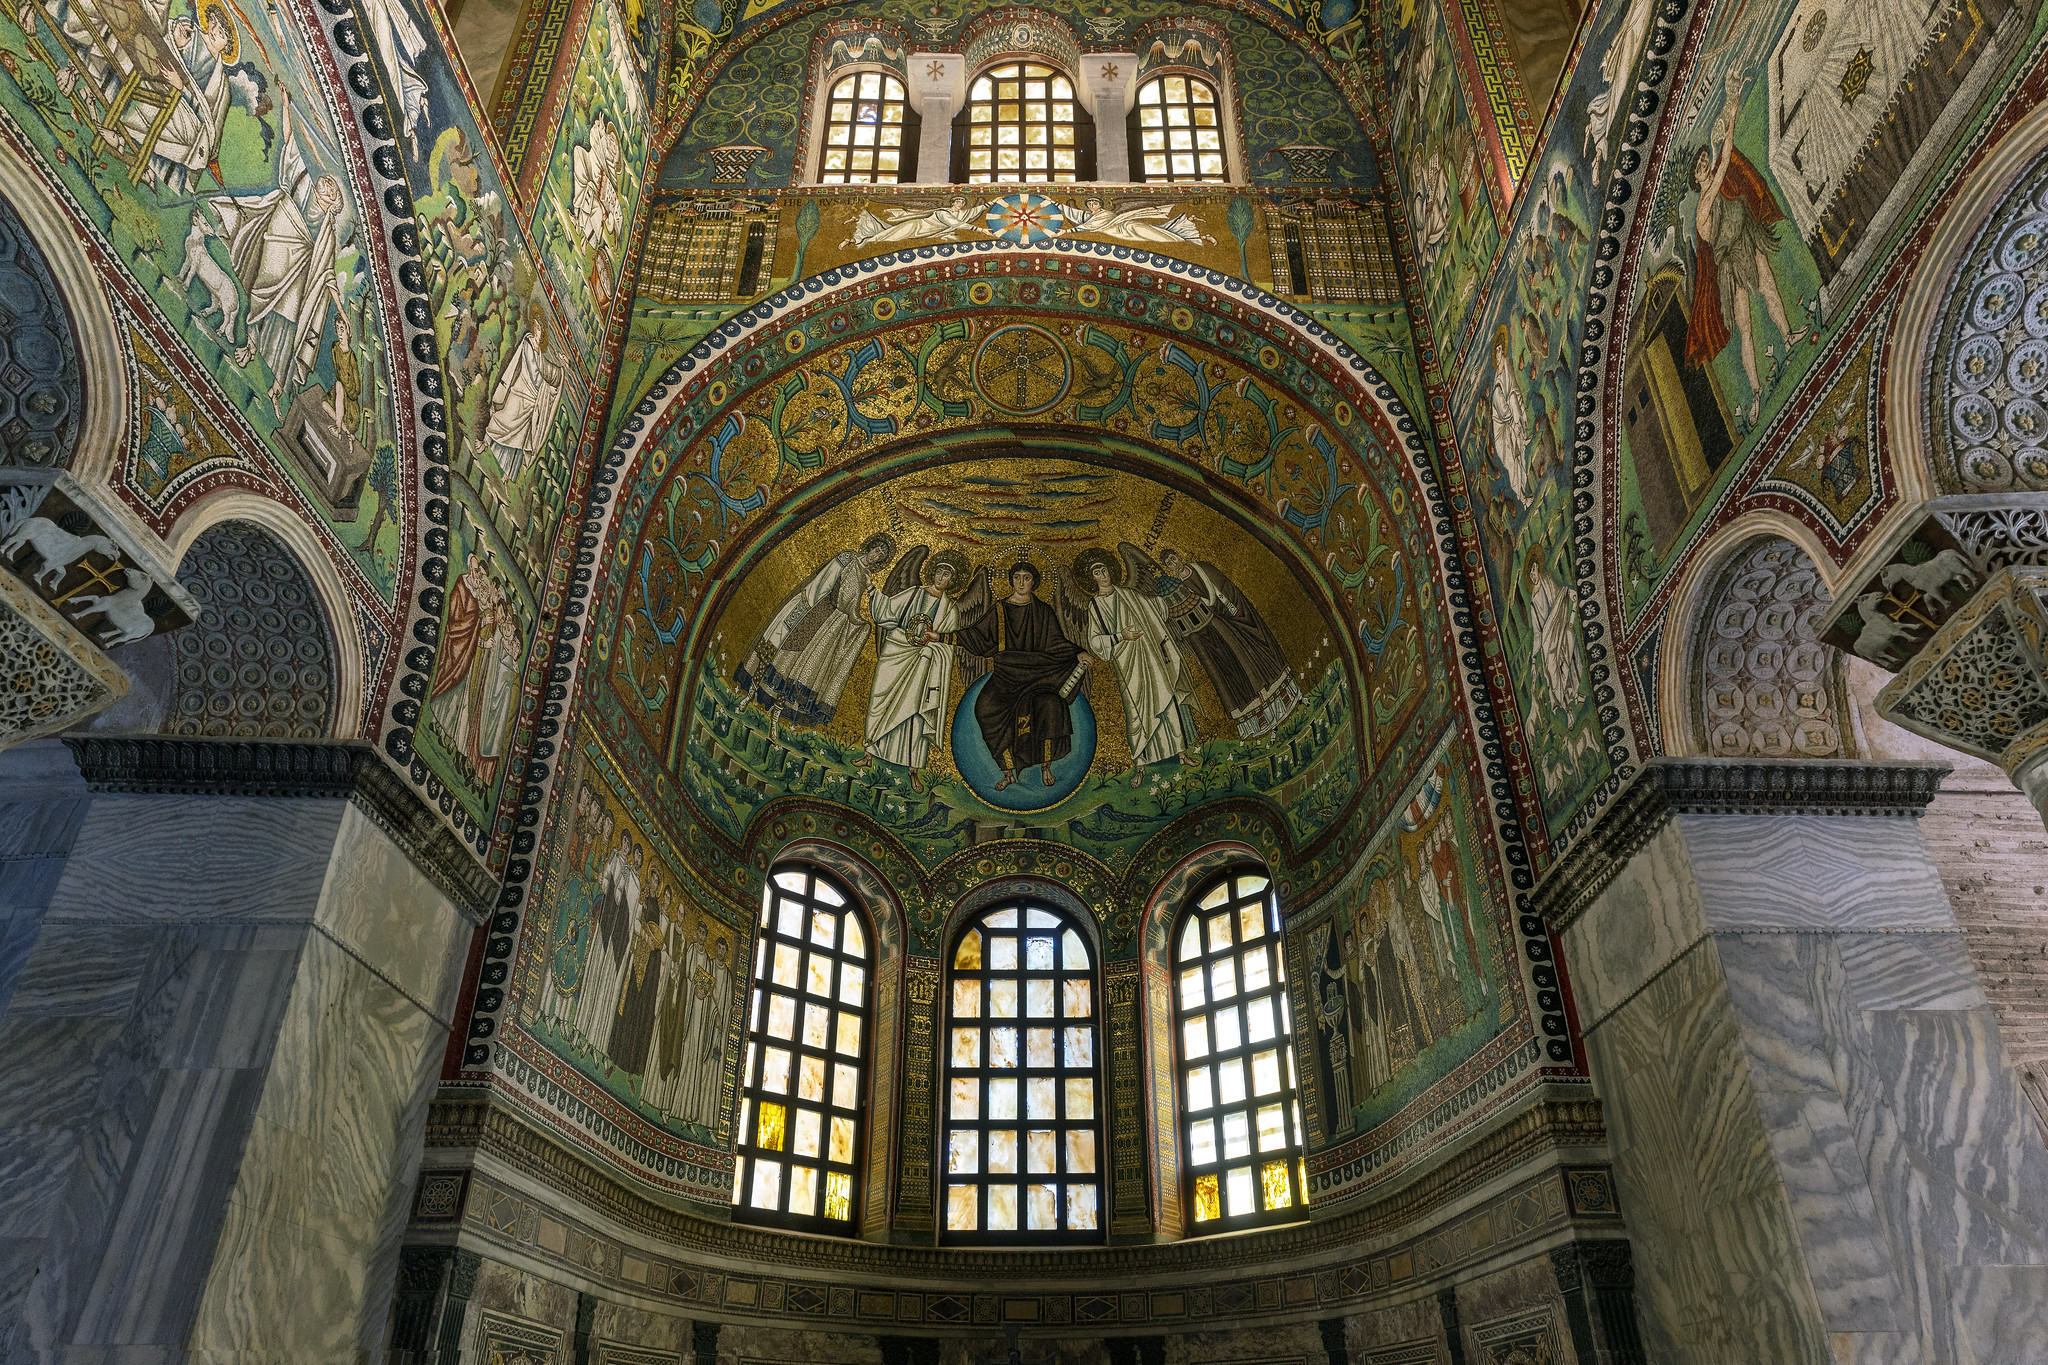 Chancel with Justinian mosaic at lower left and apse mosaic at center, San Vitale, consecrated 547, Ravenna, Italy (photo: Steven Zucker, CC BY-NC-SA 2.0)